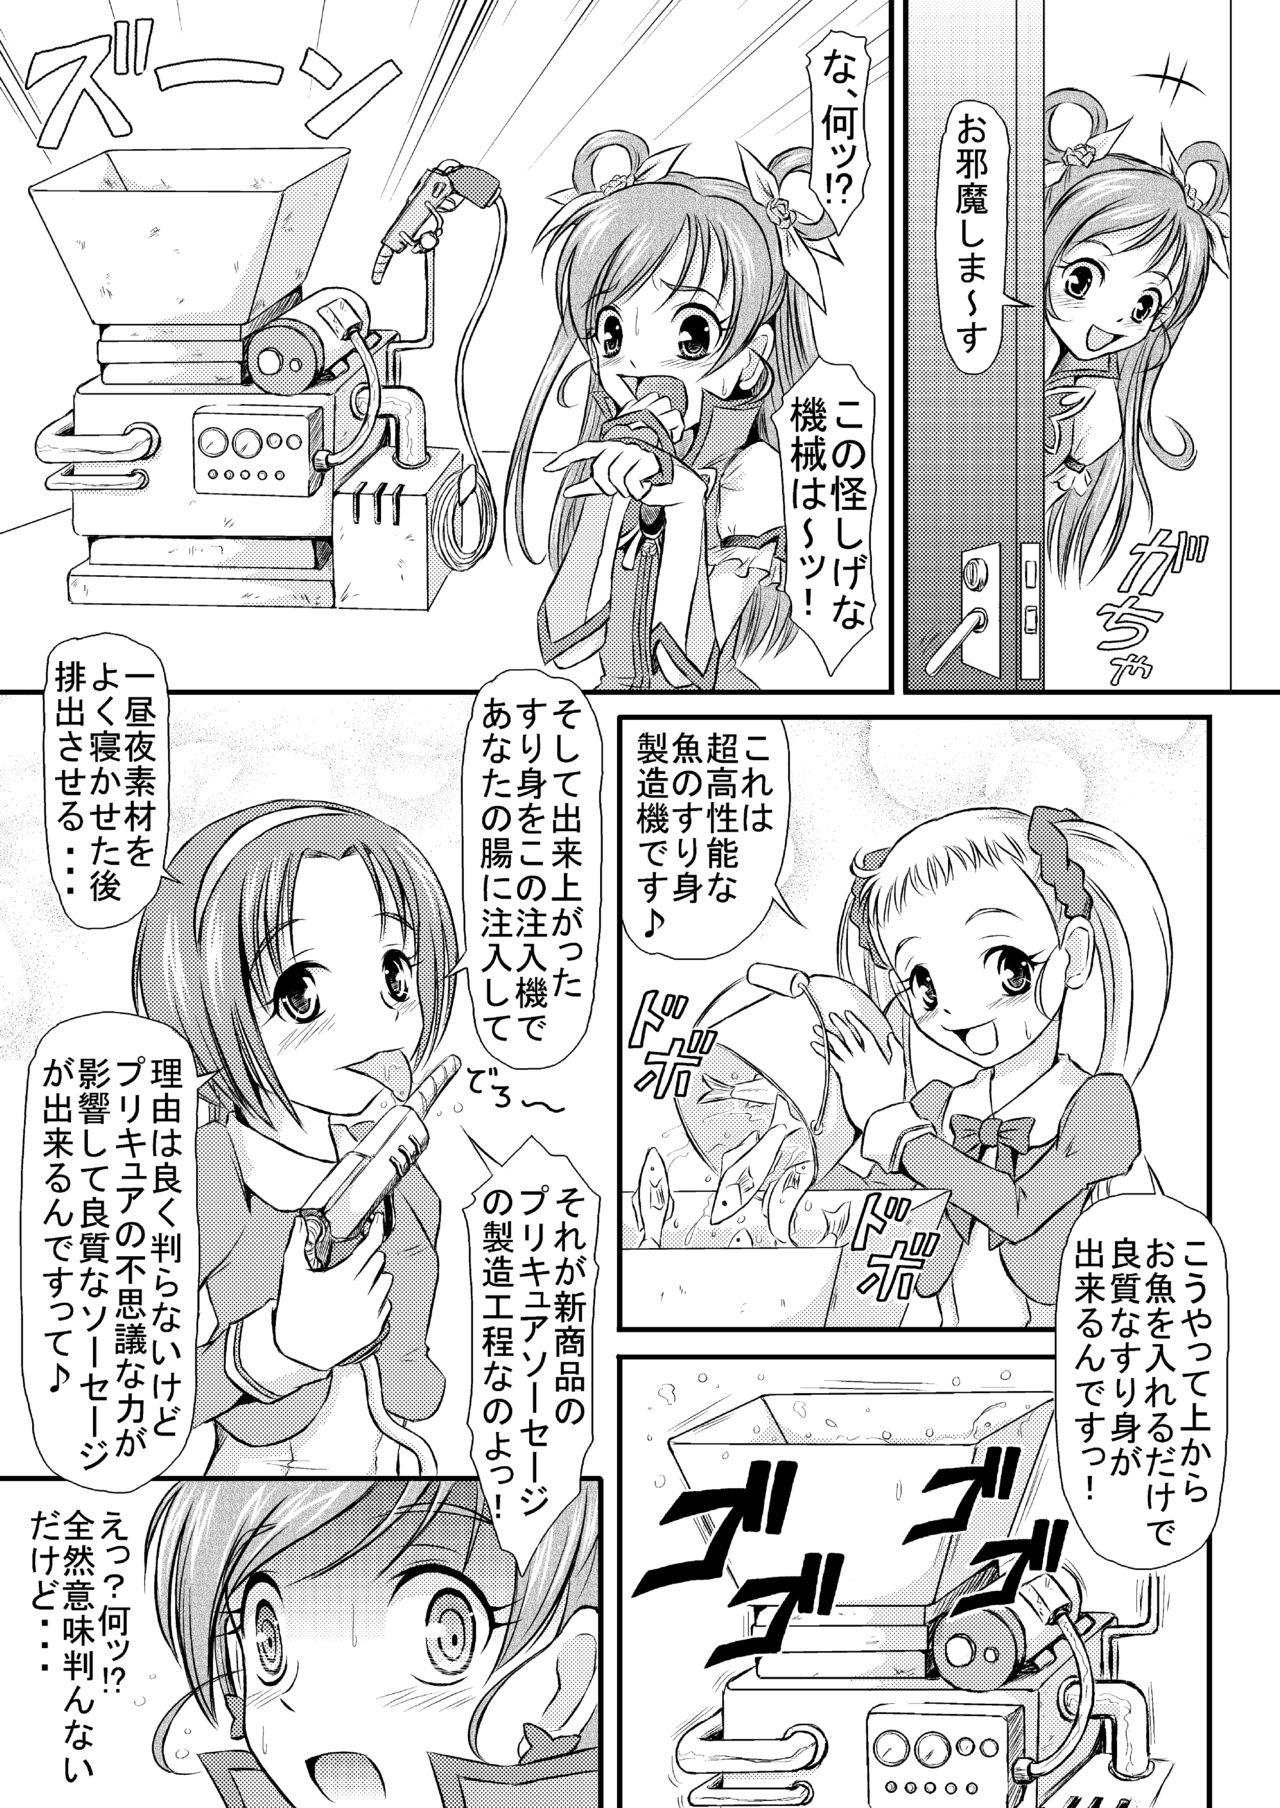 Twistys Sausage no Himitsu - Yes precure 5 Leaked - Page 4